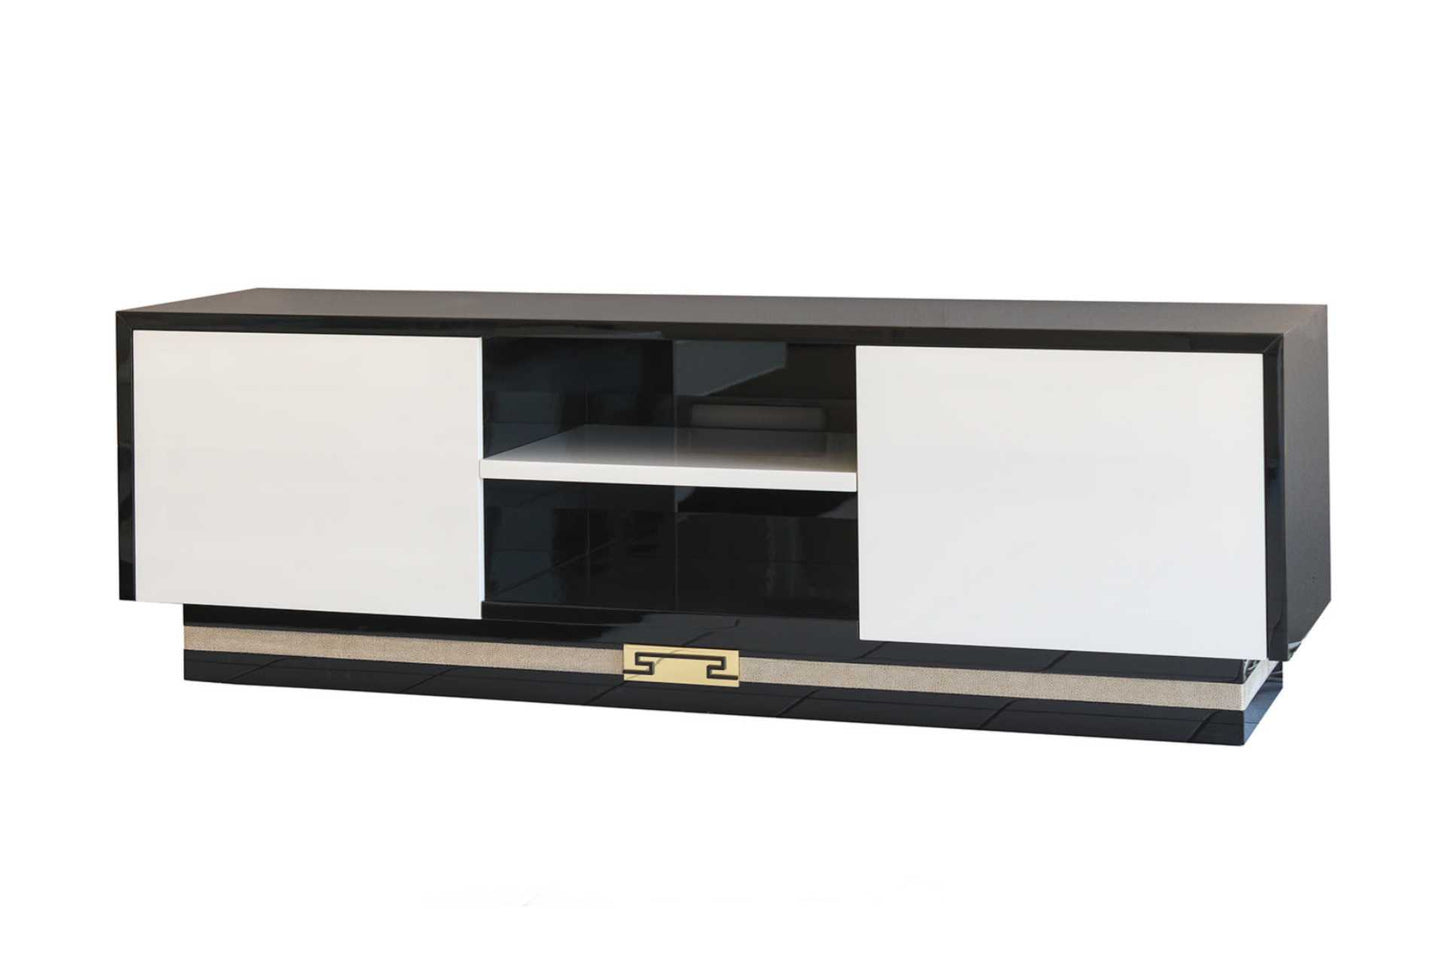 Tv stand in black gloss wood with beige gloss wood. Two door TV stand.